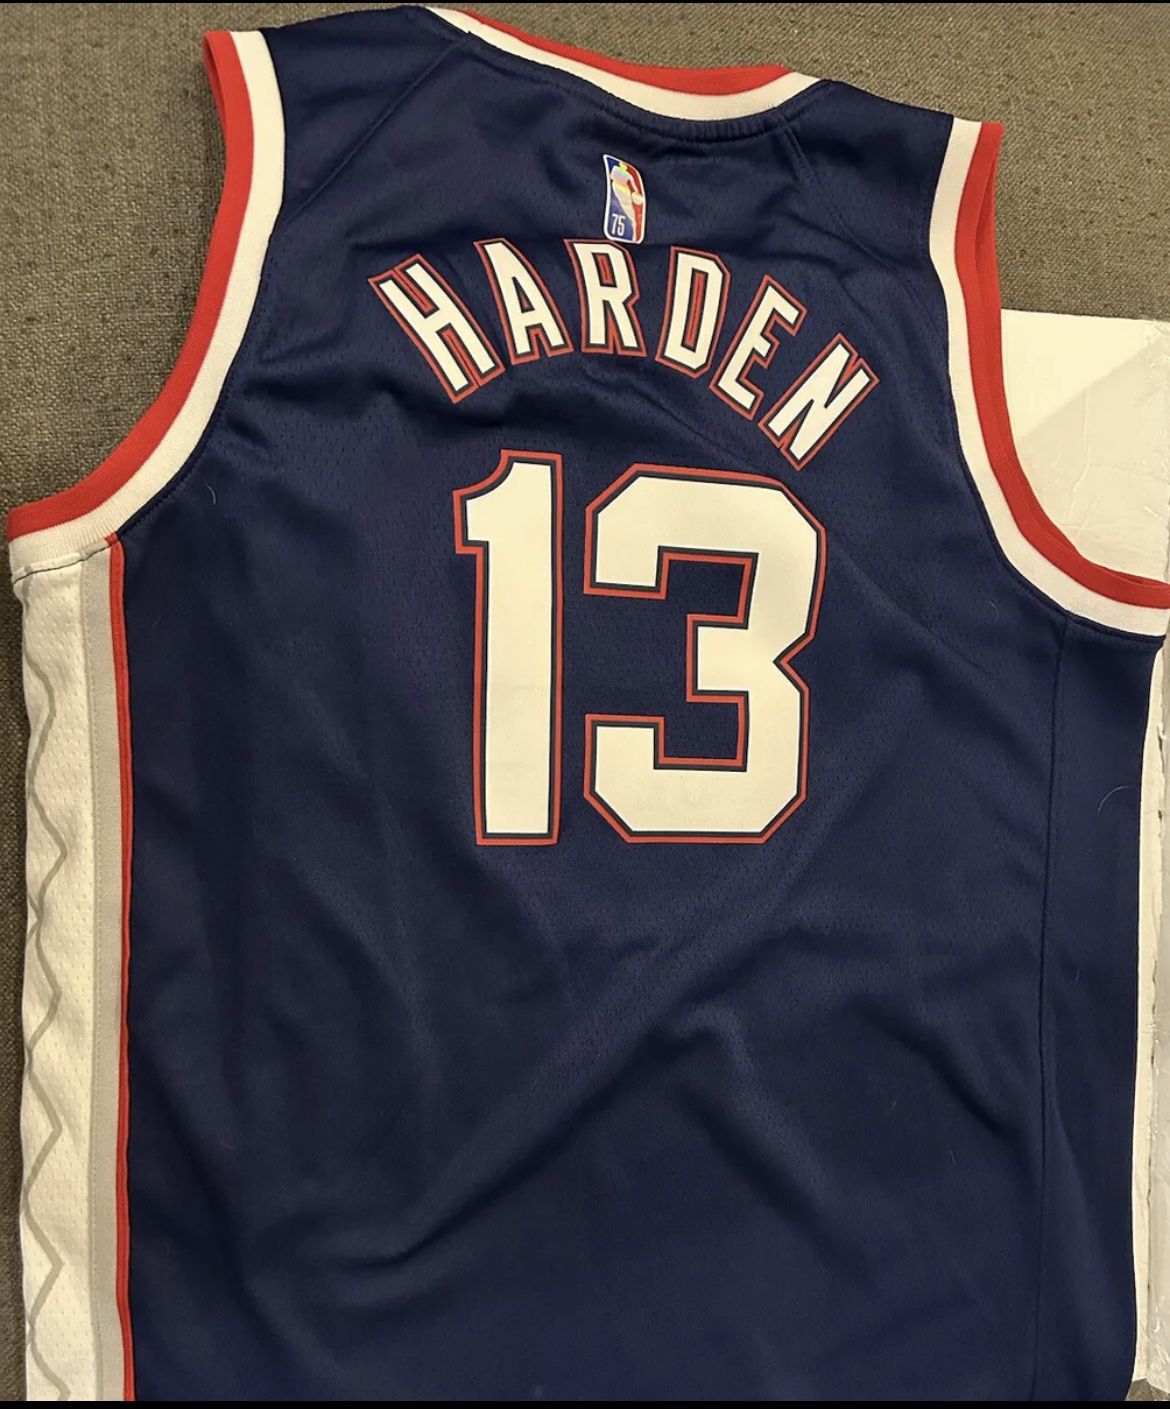 Mens New With Tags Mens NIKE Brooklyn Nets #13 James Harden Jersey Size XXL  for Sale in Riverside, CA - OfferUp